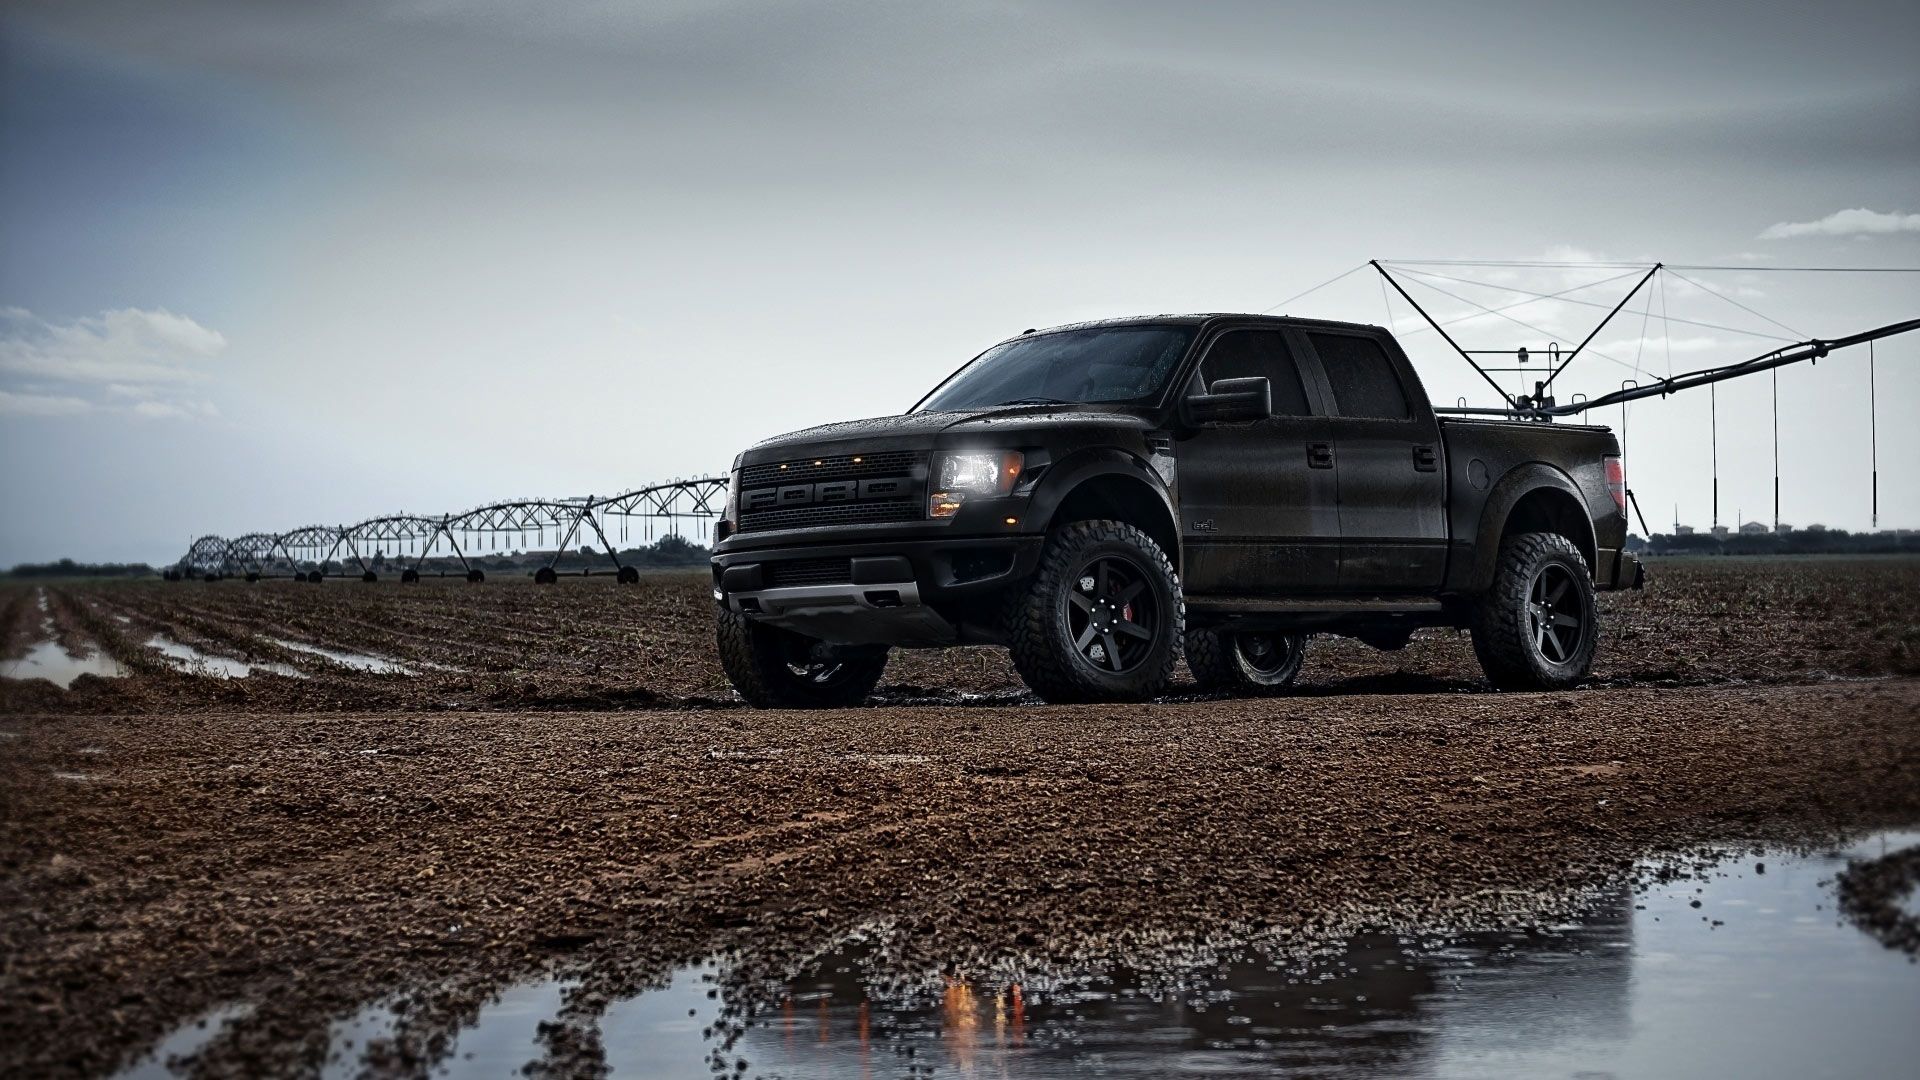 Ford F150 wallpaper for laptop